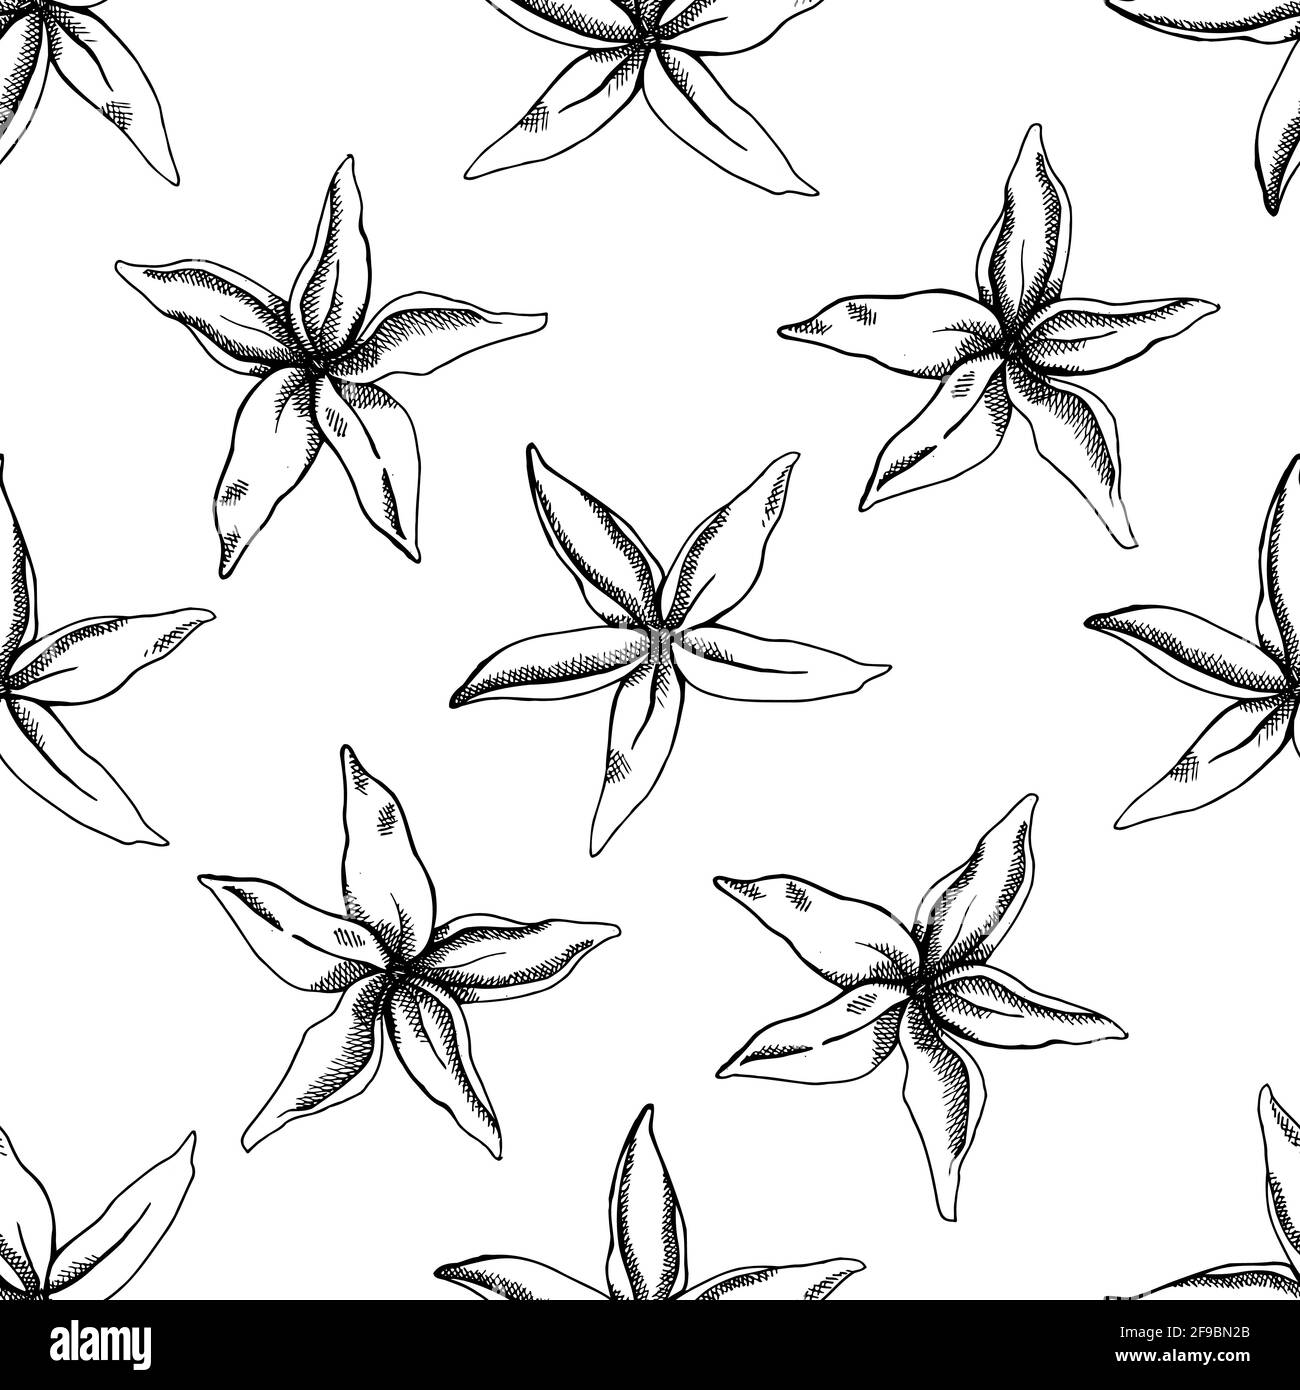 Seamless pattern with black and white hancornia Stock Vector